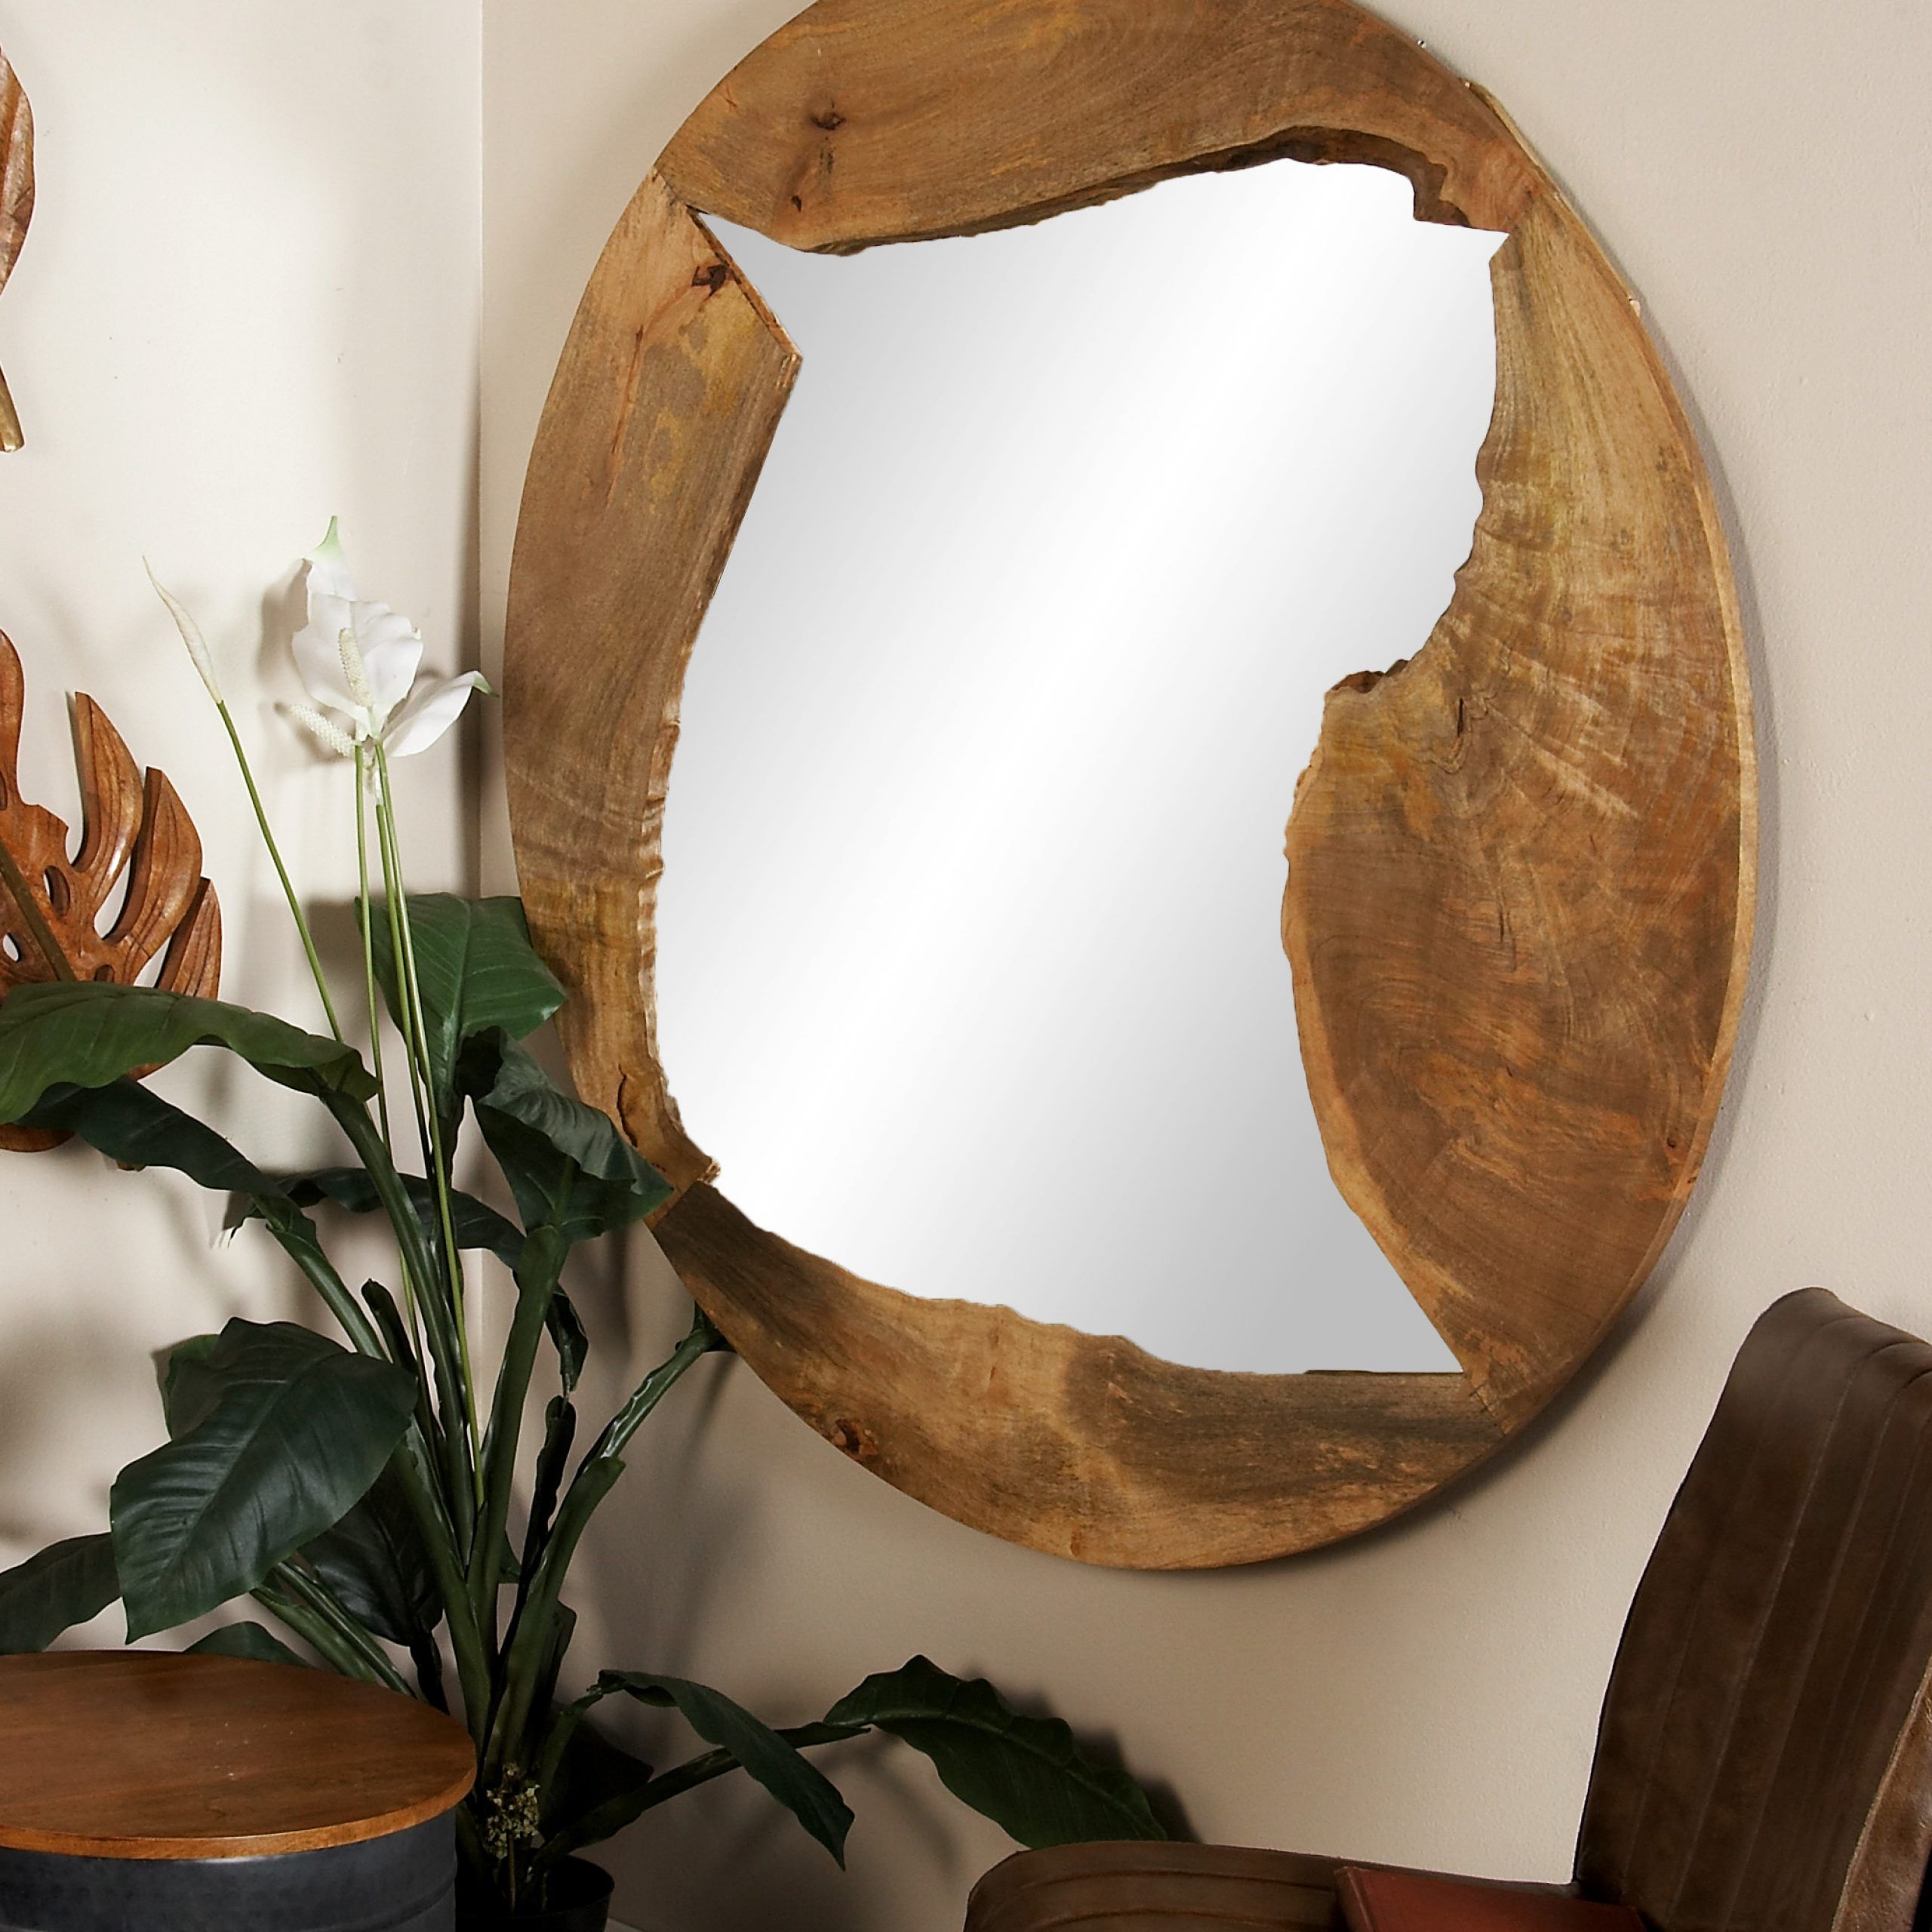 Decmode – 48" Large Round Natural Live Edge Reclaimed Wood Wall Mirror Intended For Round Scalloped Wall Mirrors (View 4 of 15)